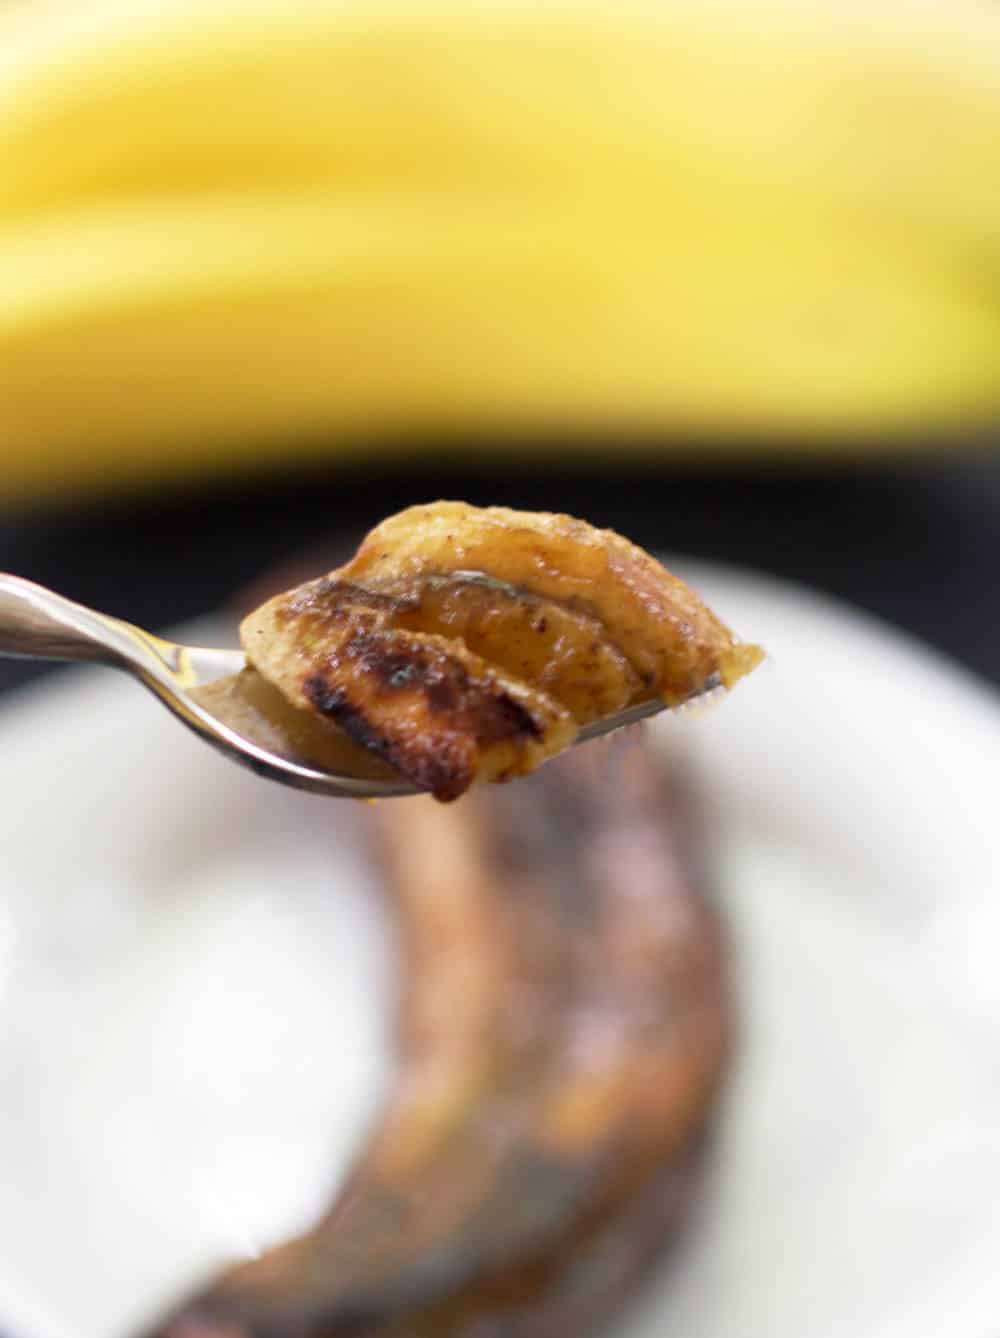 Easy Rum-Glazed Grilled Bananas are simple to prepare and delicious after a big meal.